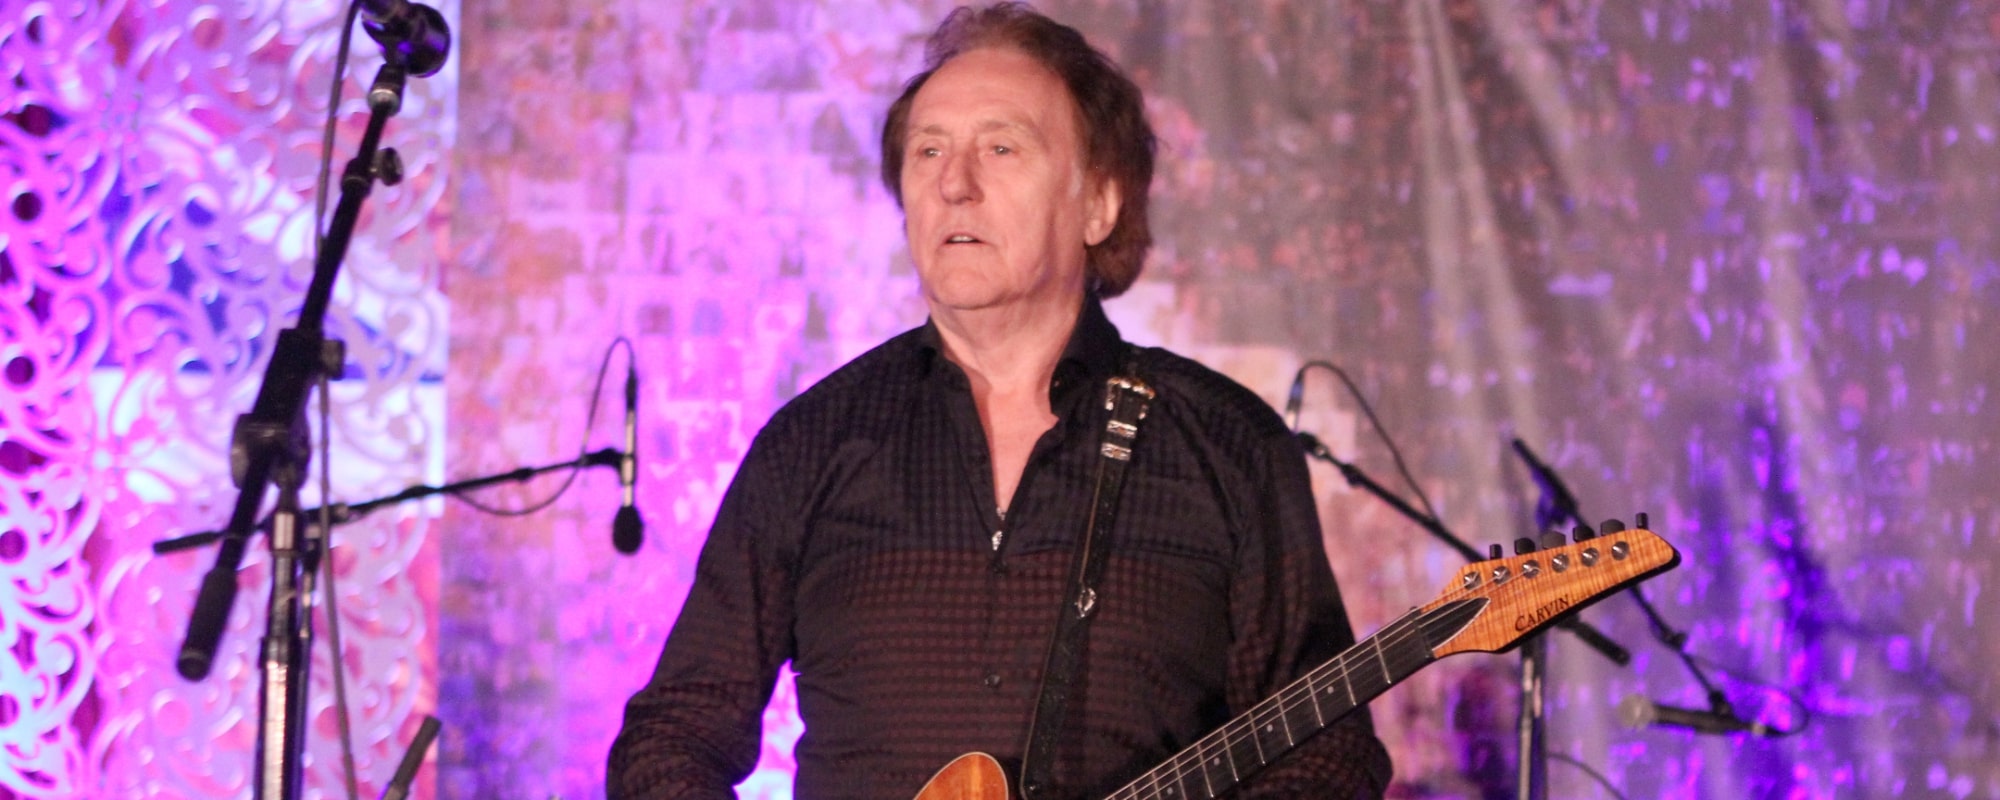 Denny Laine (@dennylaineofficialpage) • Instagram photos and videos